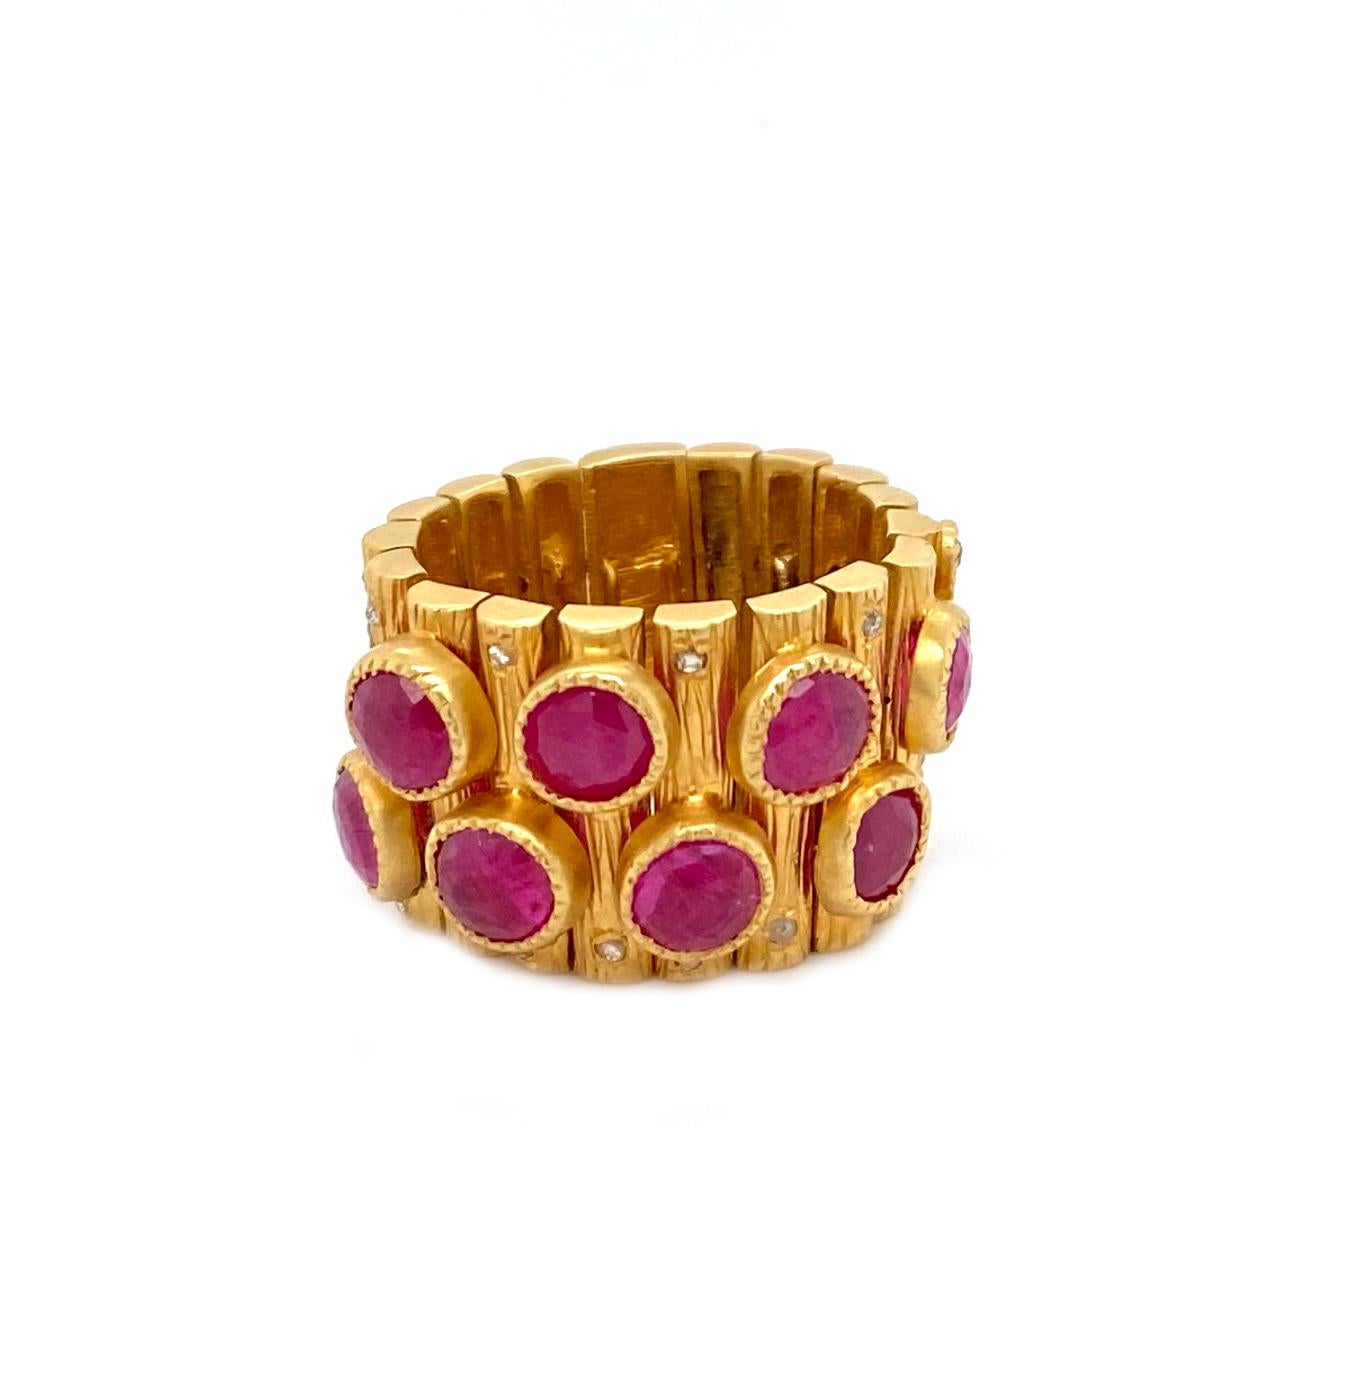 Stunning Art Deco Style Mosaic Statement ring from Coomi set in 20 Karat Yellow Gold with Ruby weighing approximately 5.09cts and Diamonds 0.19cts, brought to you from the Luminosity Collection, which consists of bold design and reflects light from